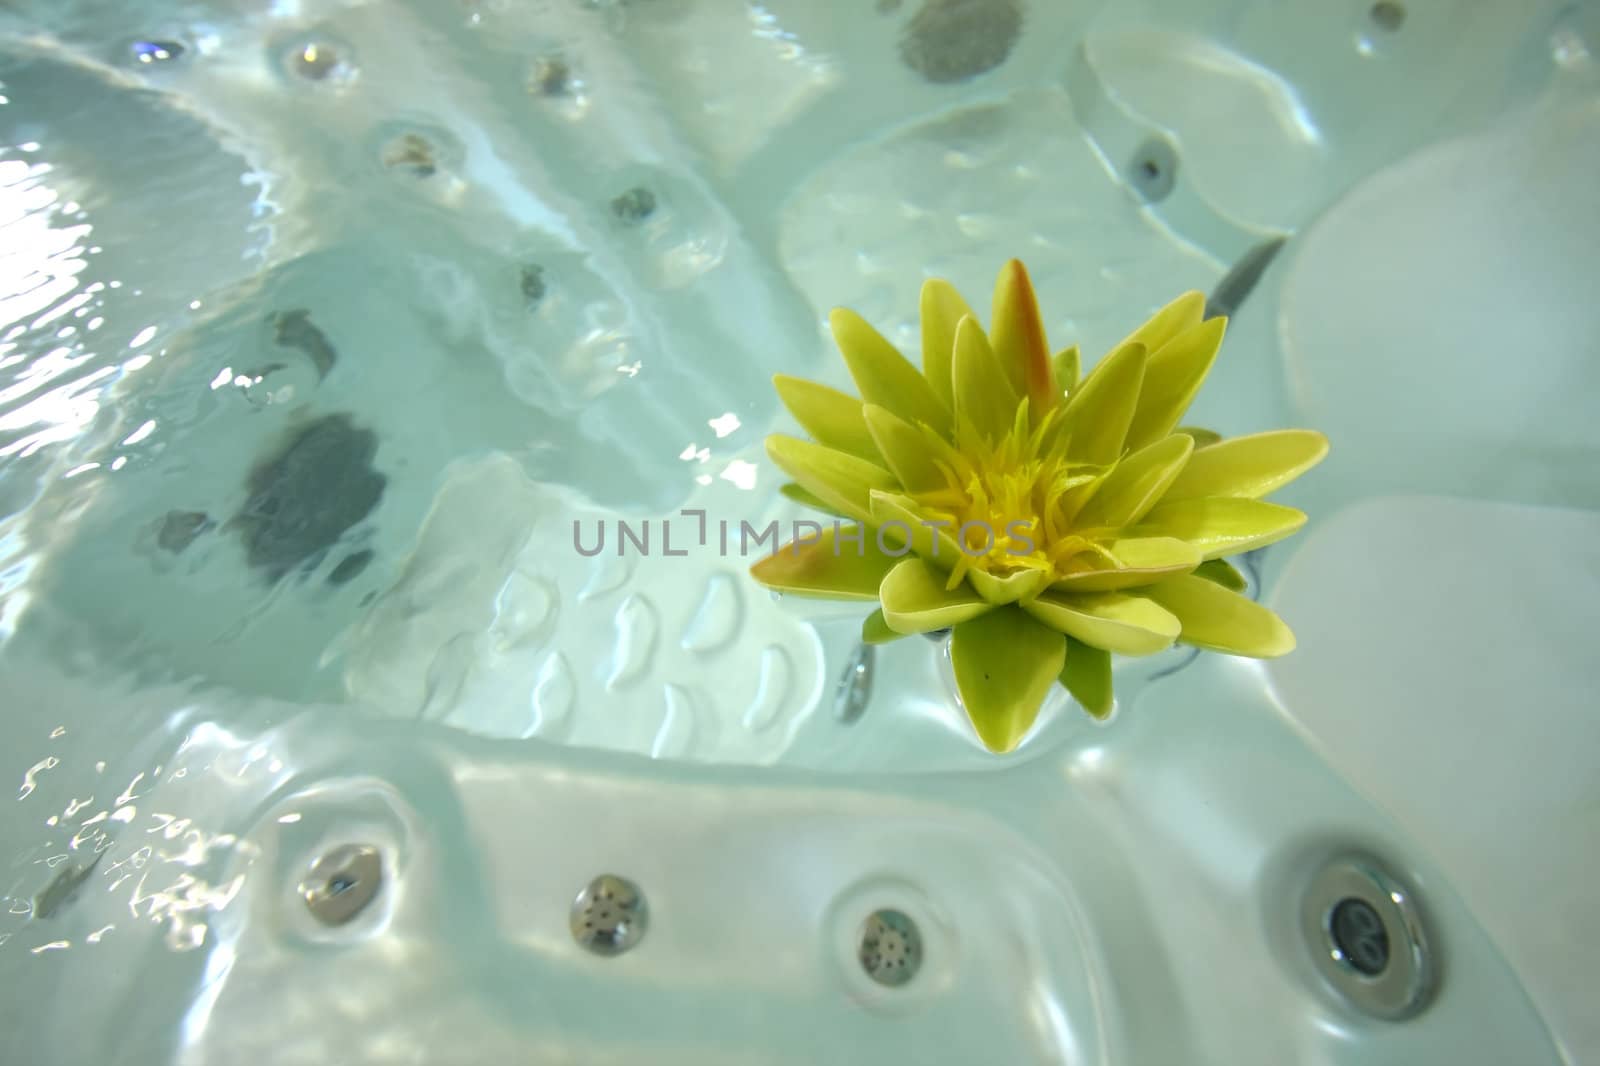 Jacuzzi with a lotus floating in it